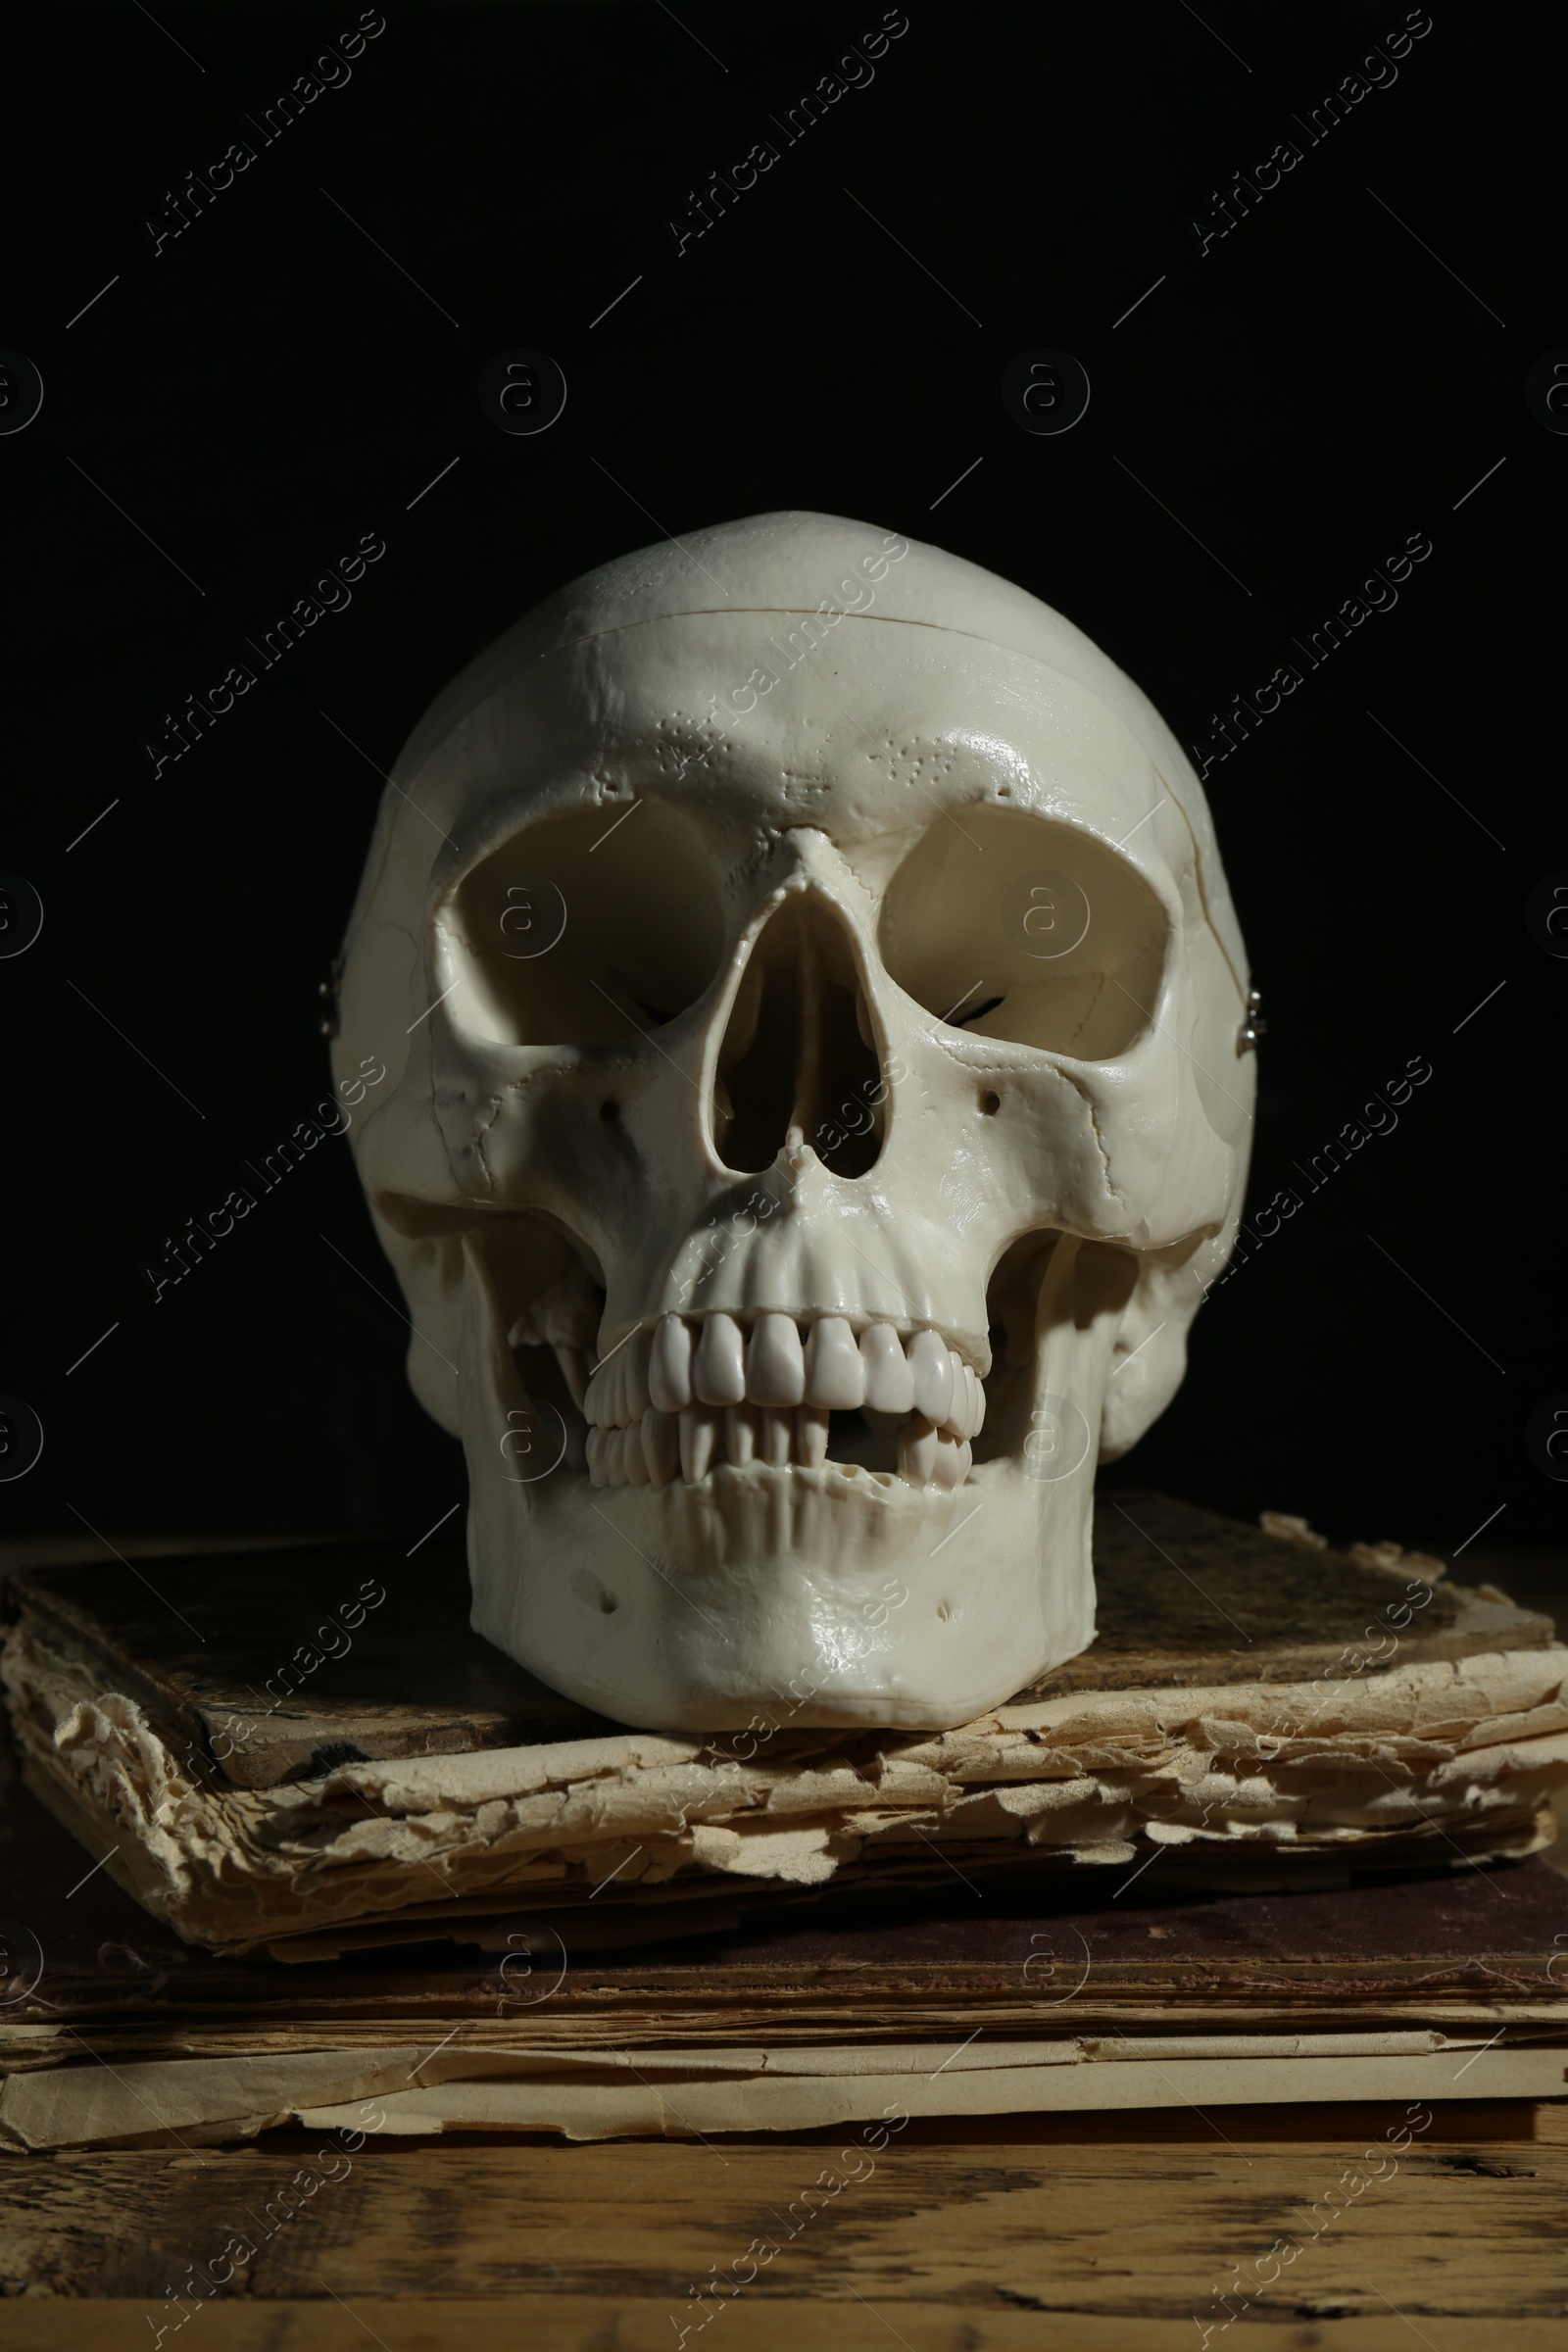 Photo of Human skull and old book on wooden table against black background